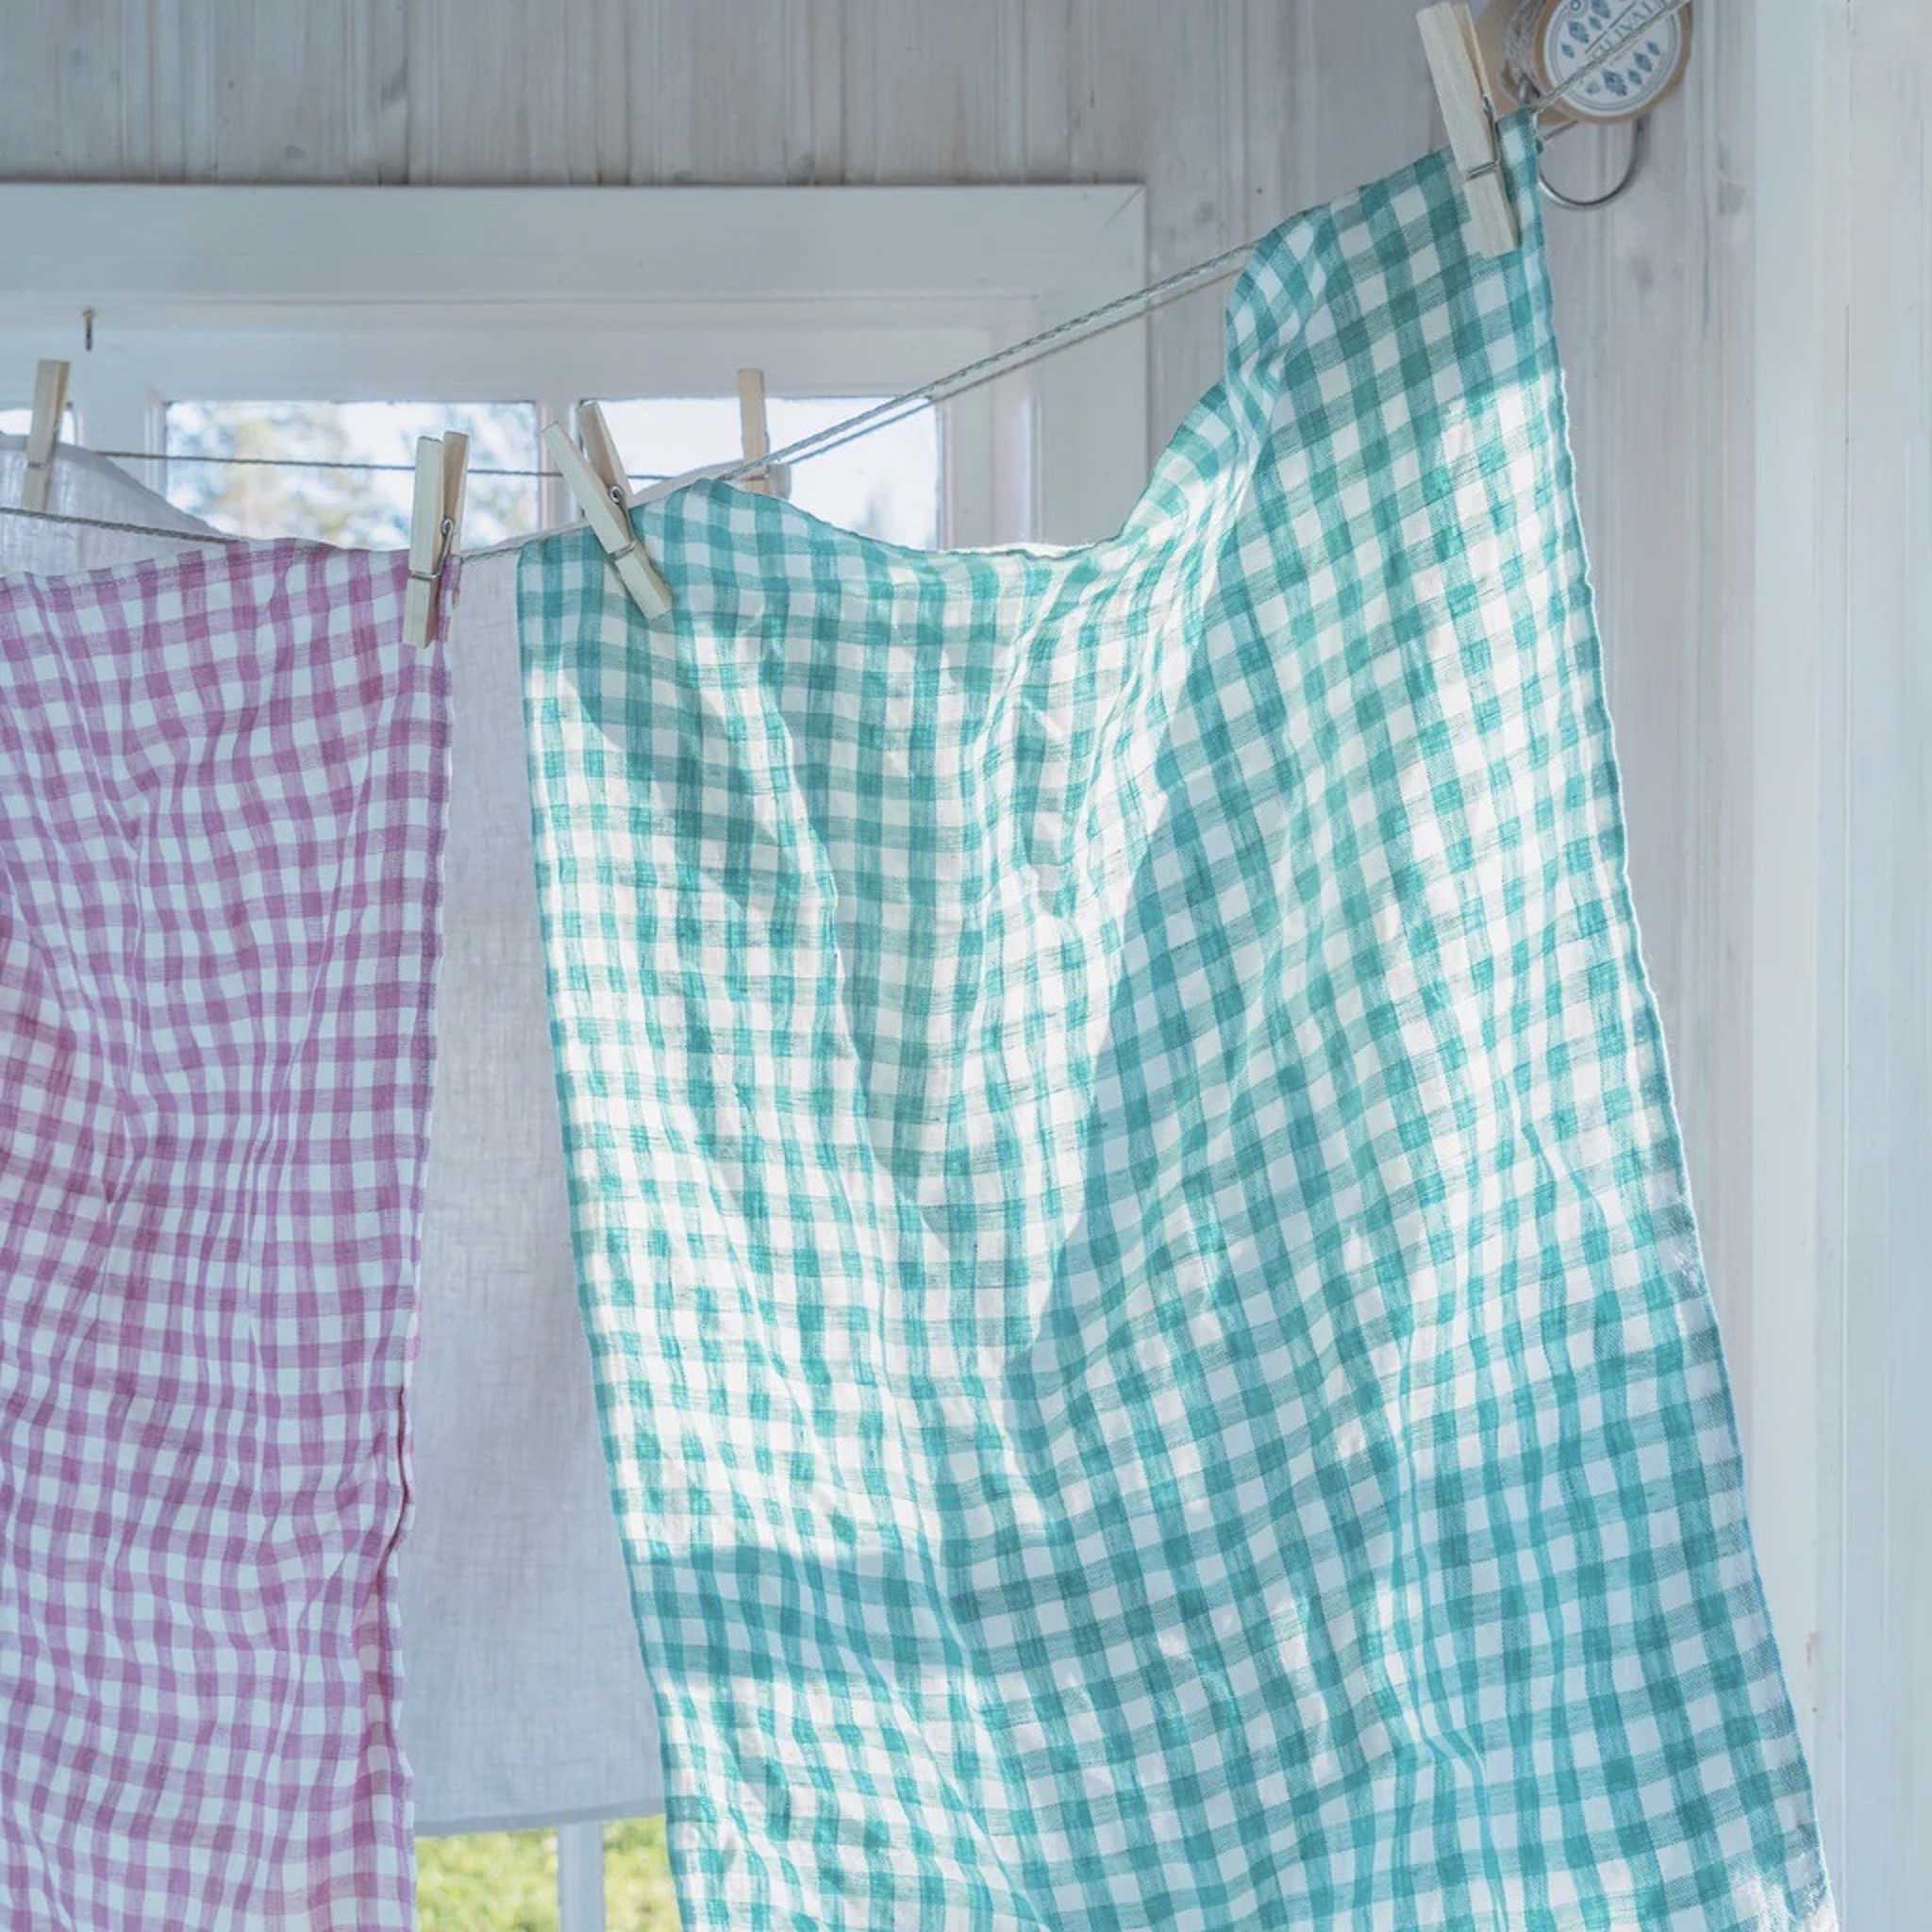 linen kitchen towels in green and pink